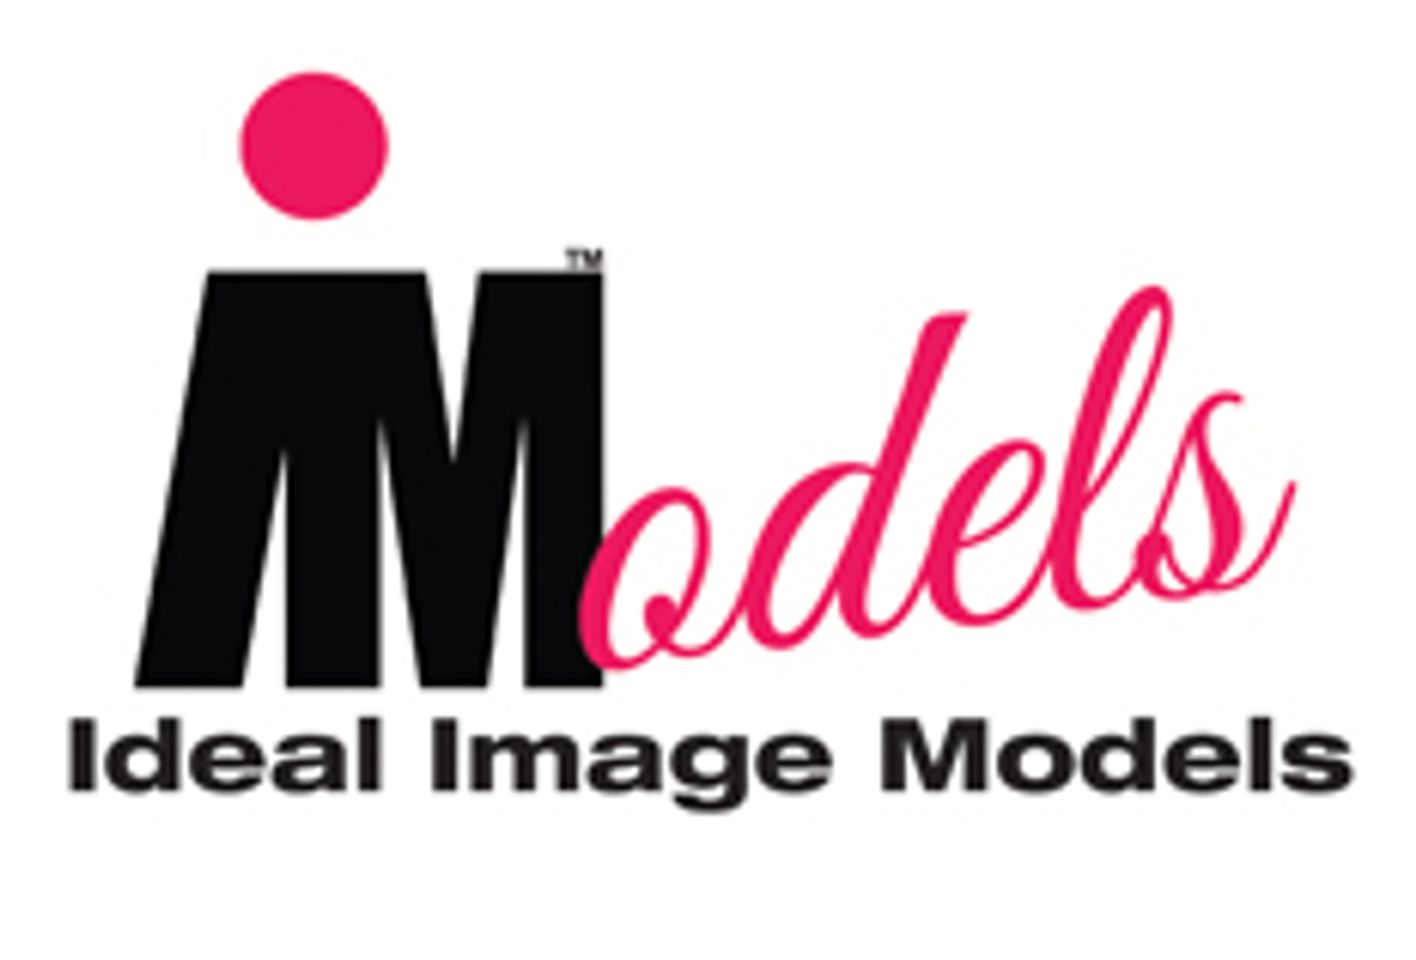 Ideal Image Models Nominated for Urban X Awards